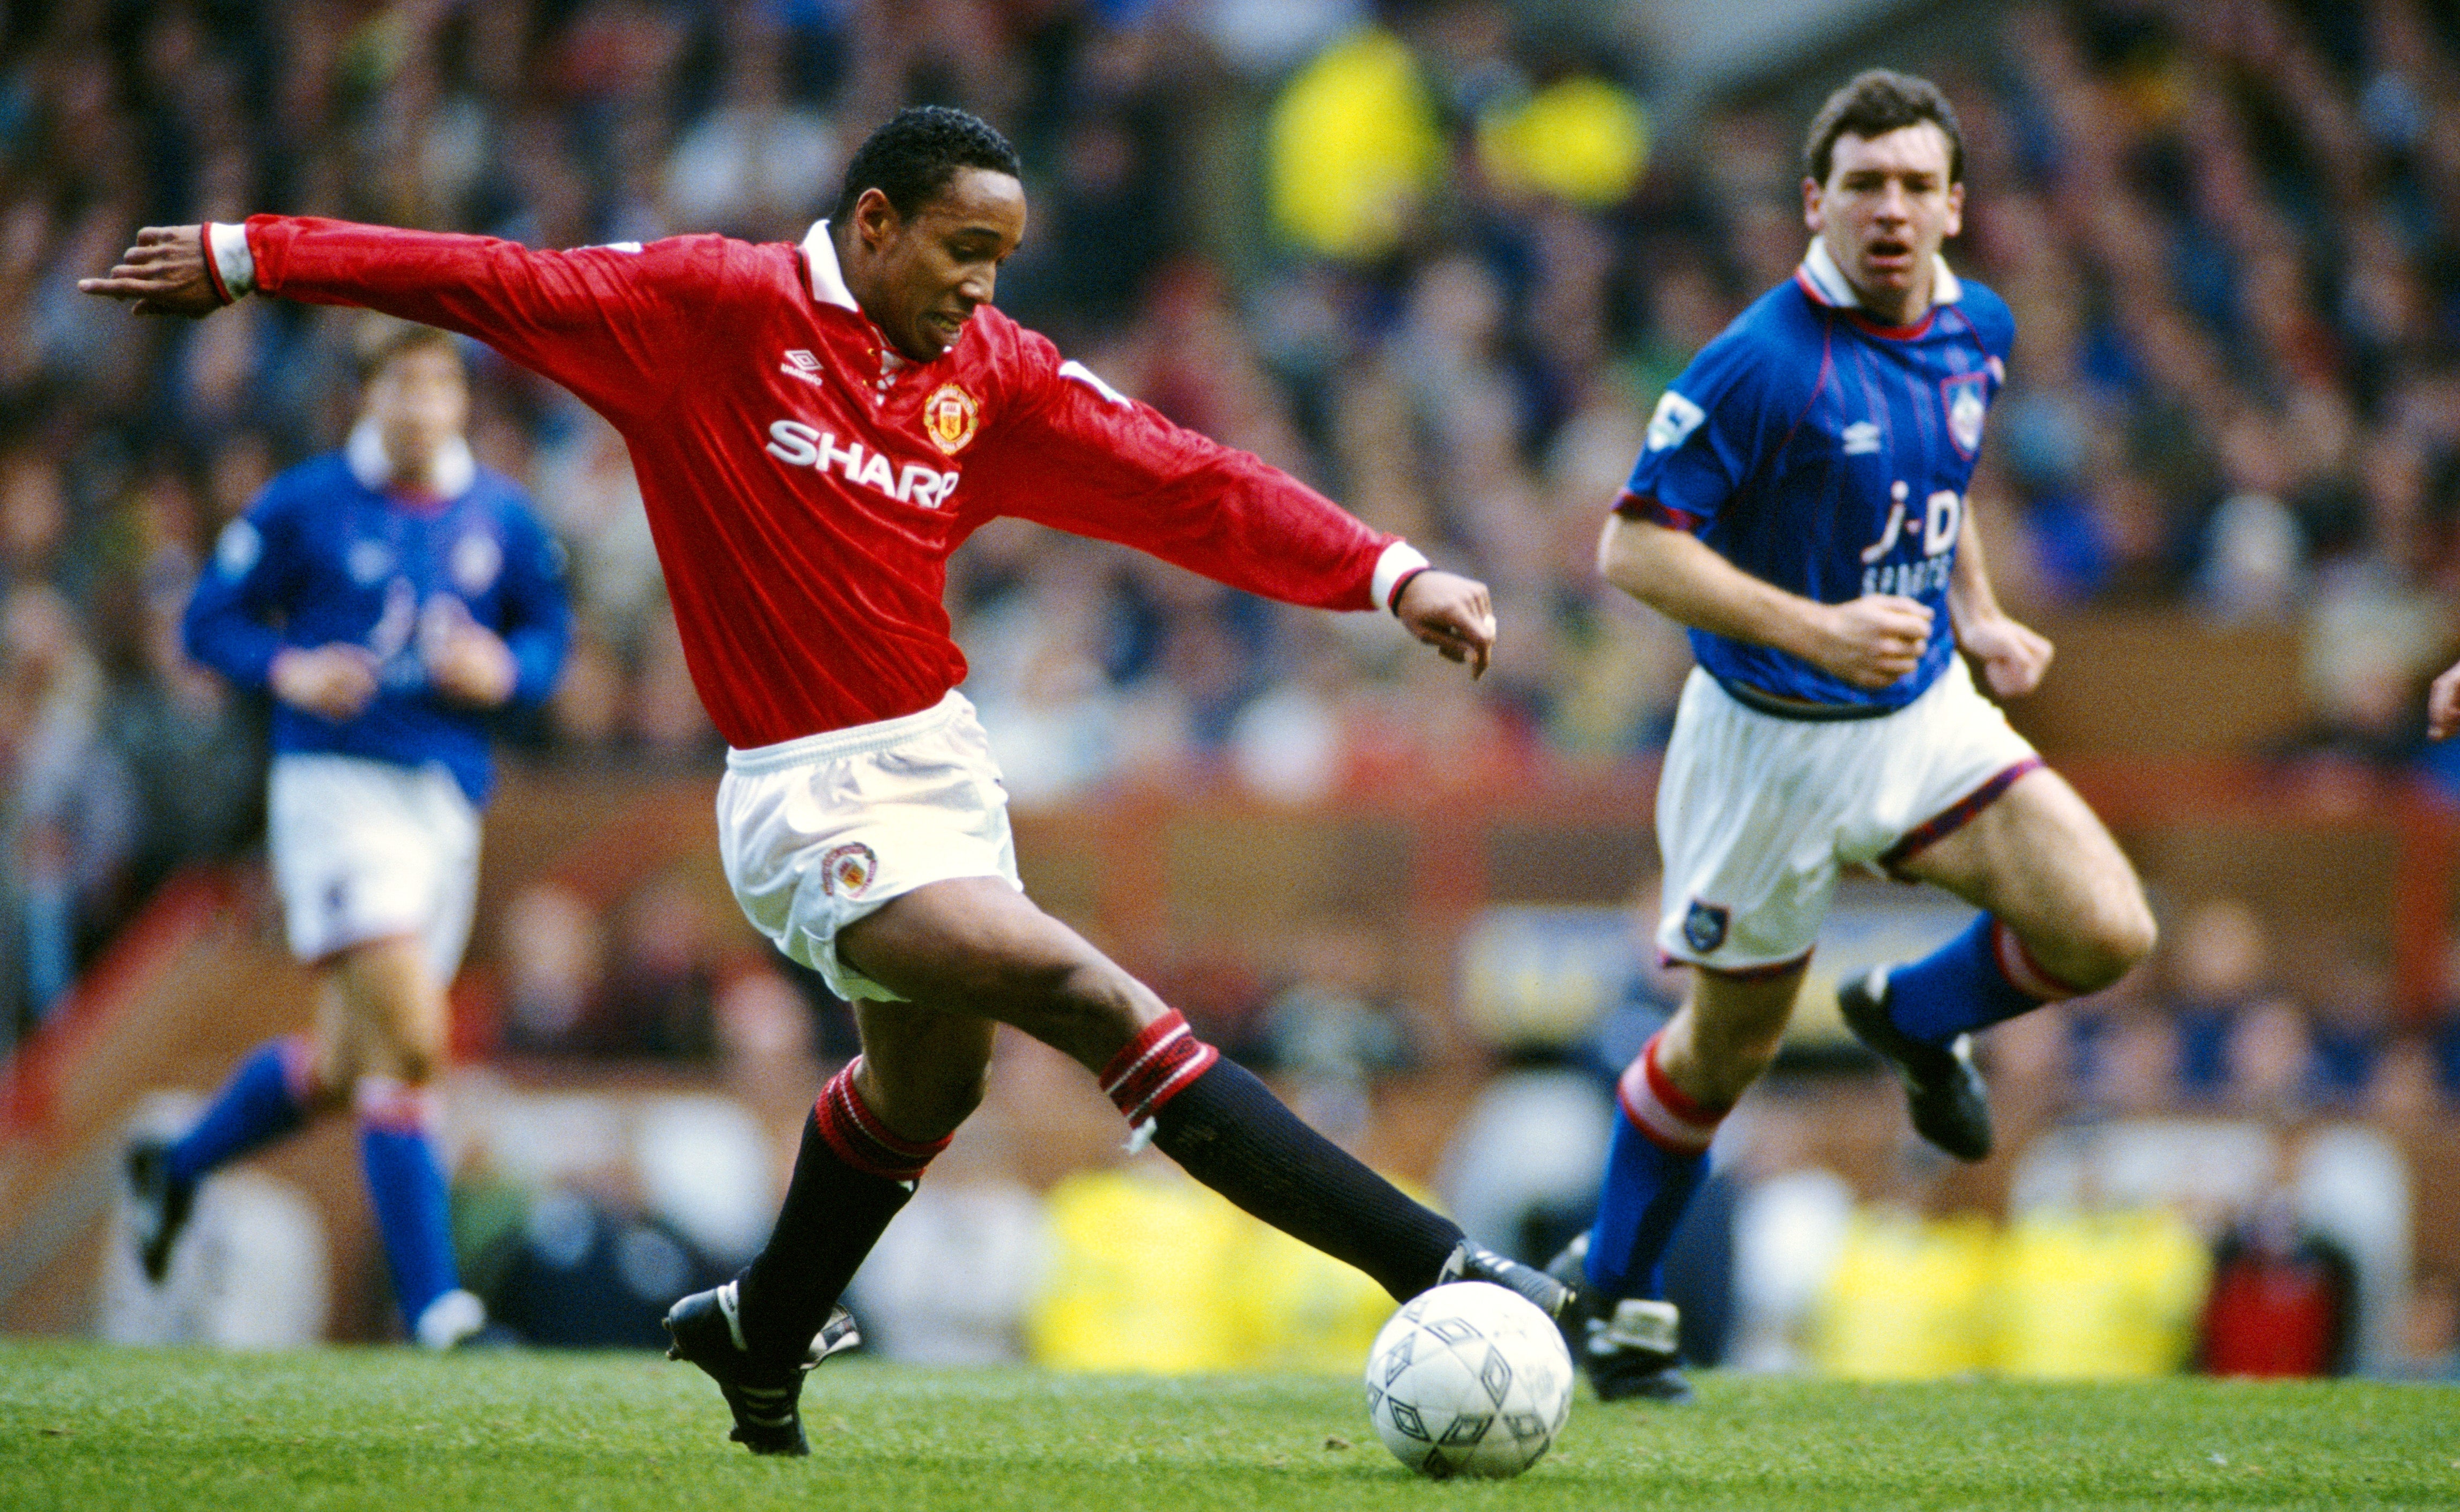 Paul Ince in action for Manchester United against Oldham, April 1994